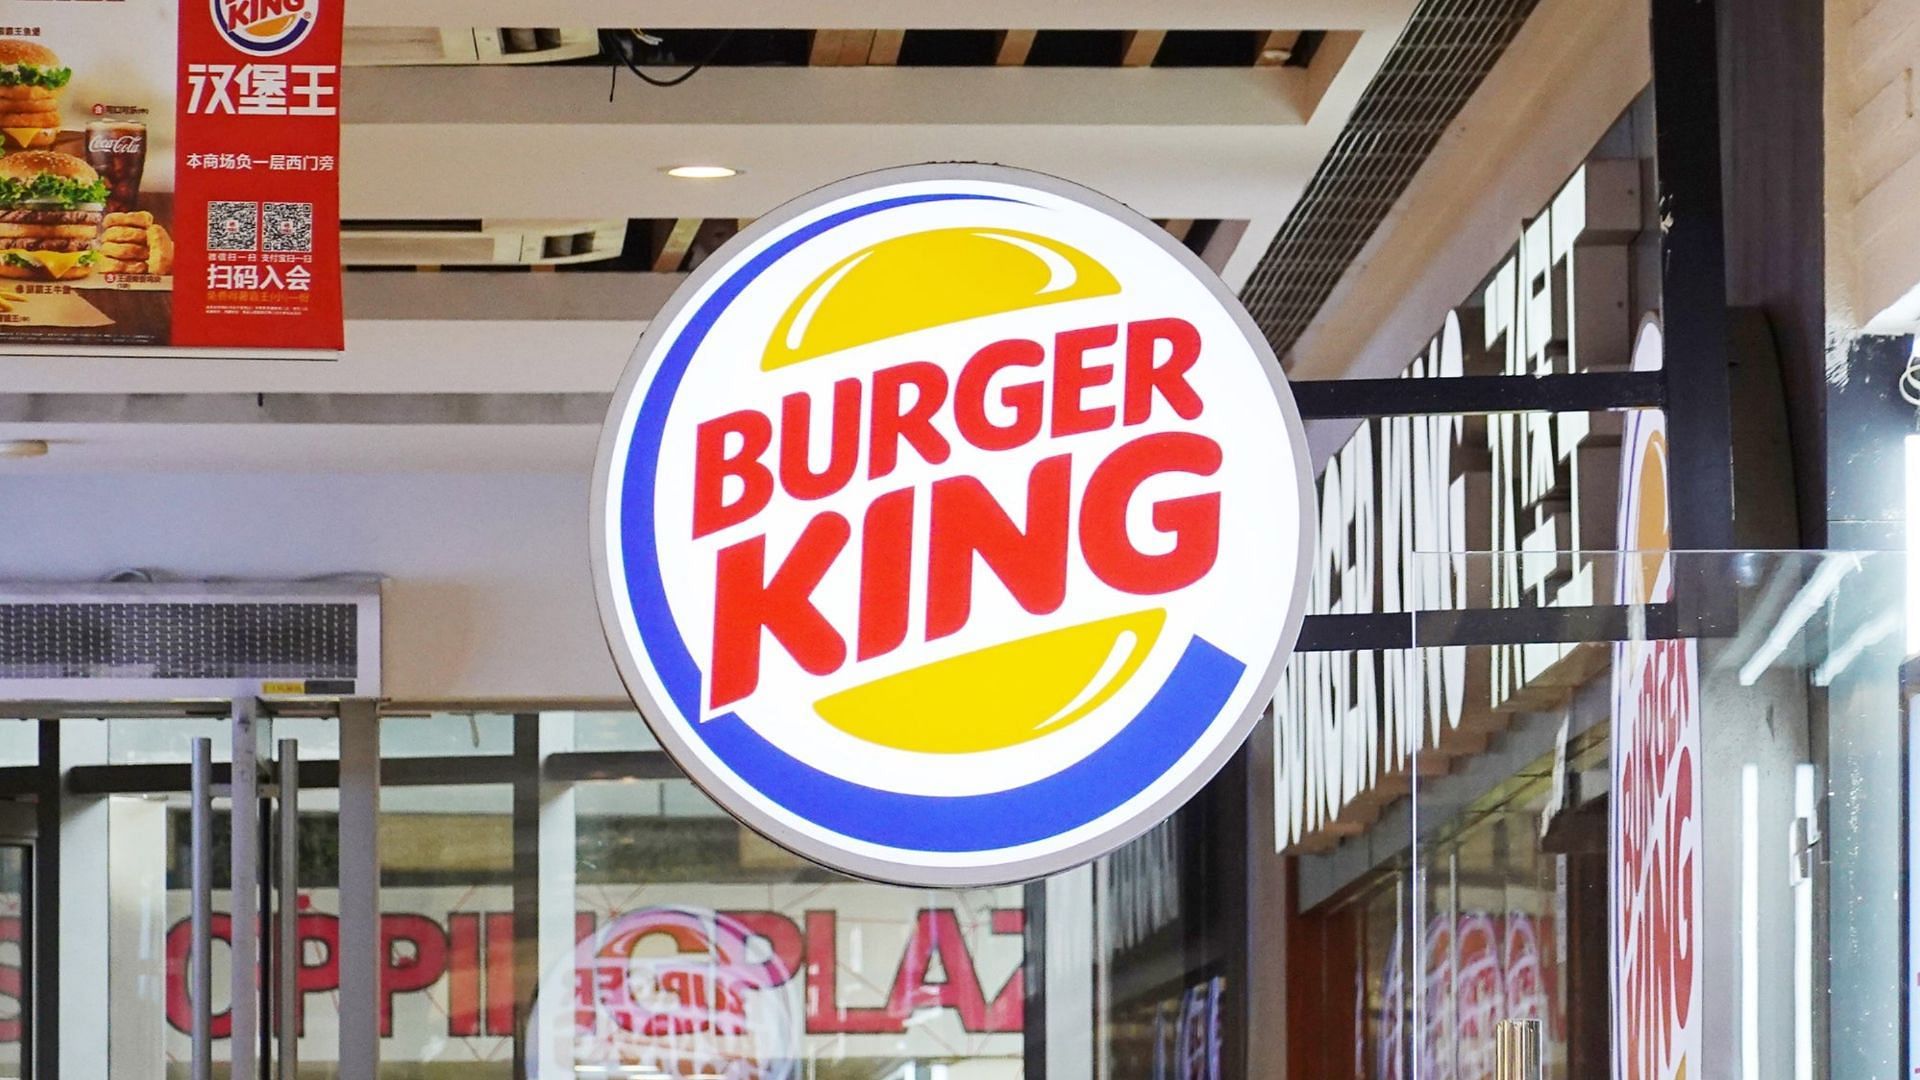 Burger King is among the major fast food businesses that were forced to close over 10% locations during the pandemic (Image via SOPA Images/Getty Images)